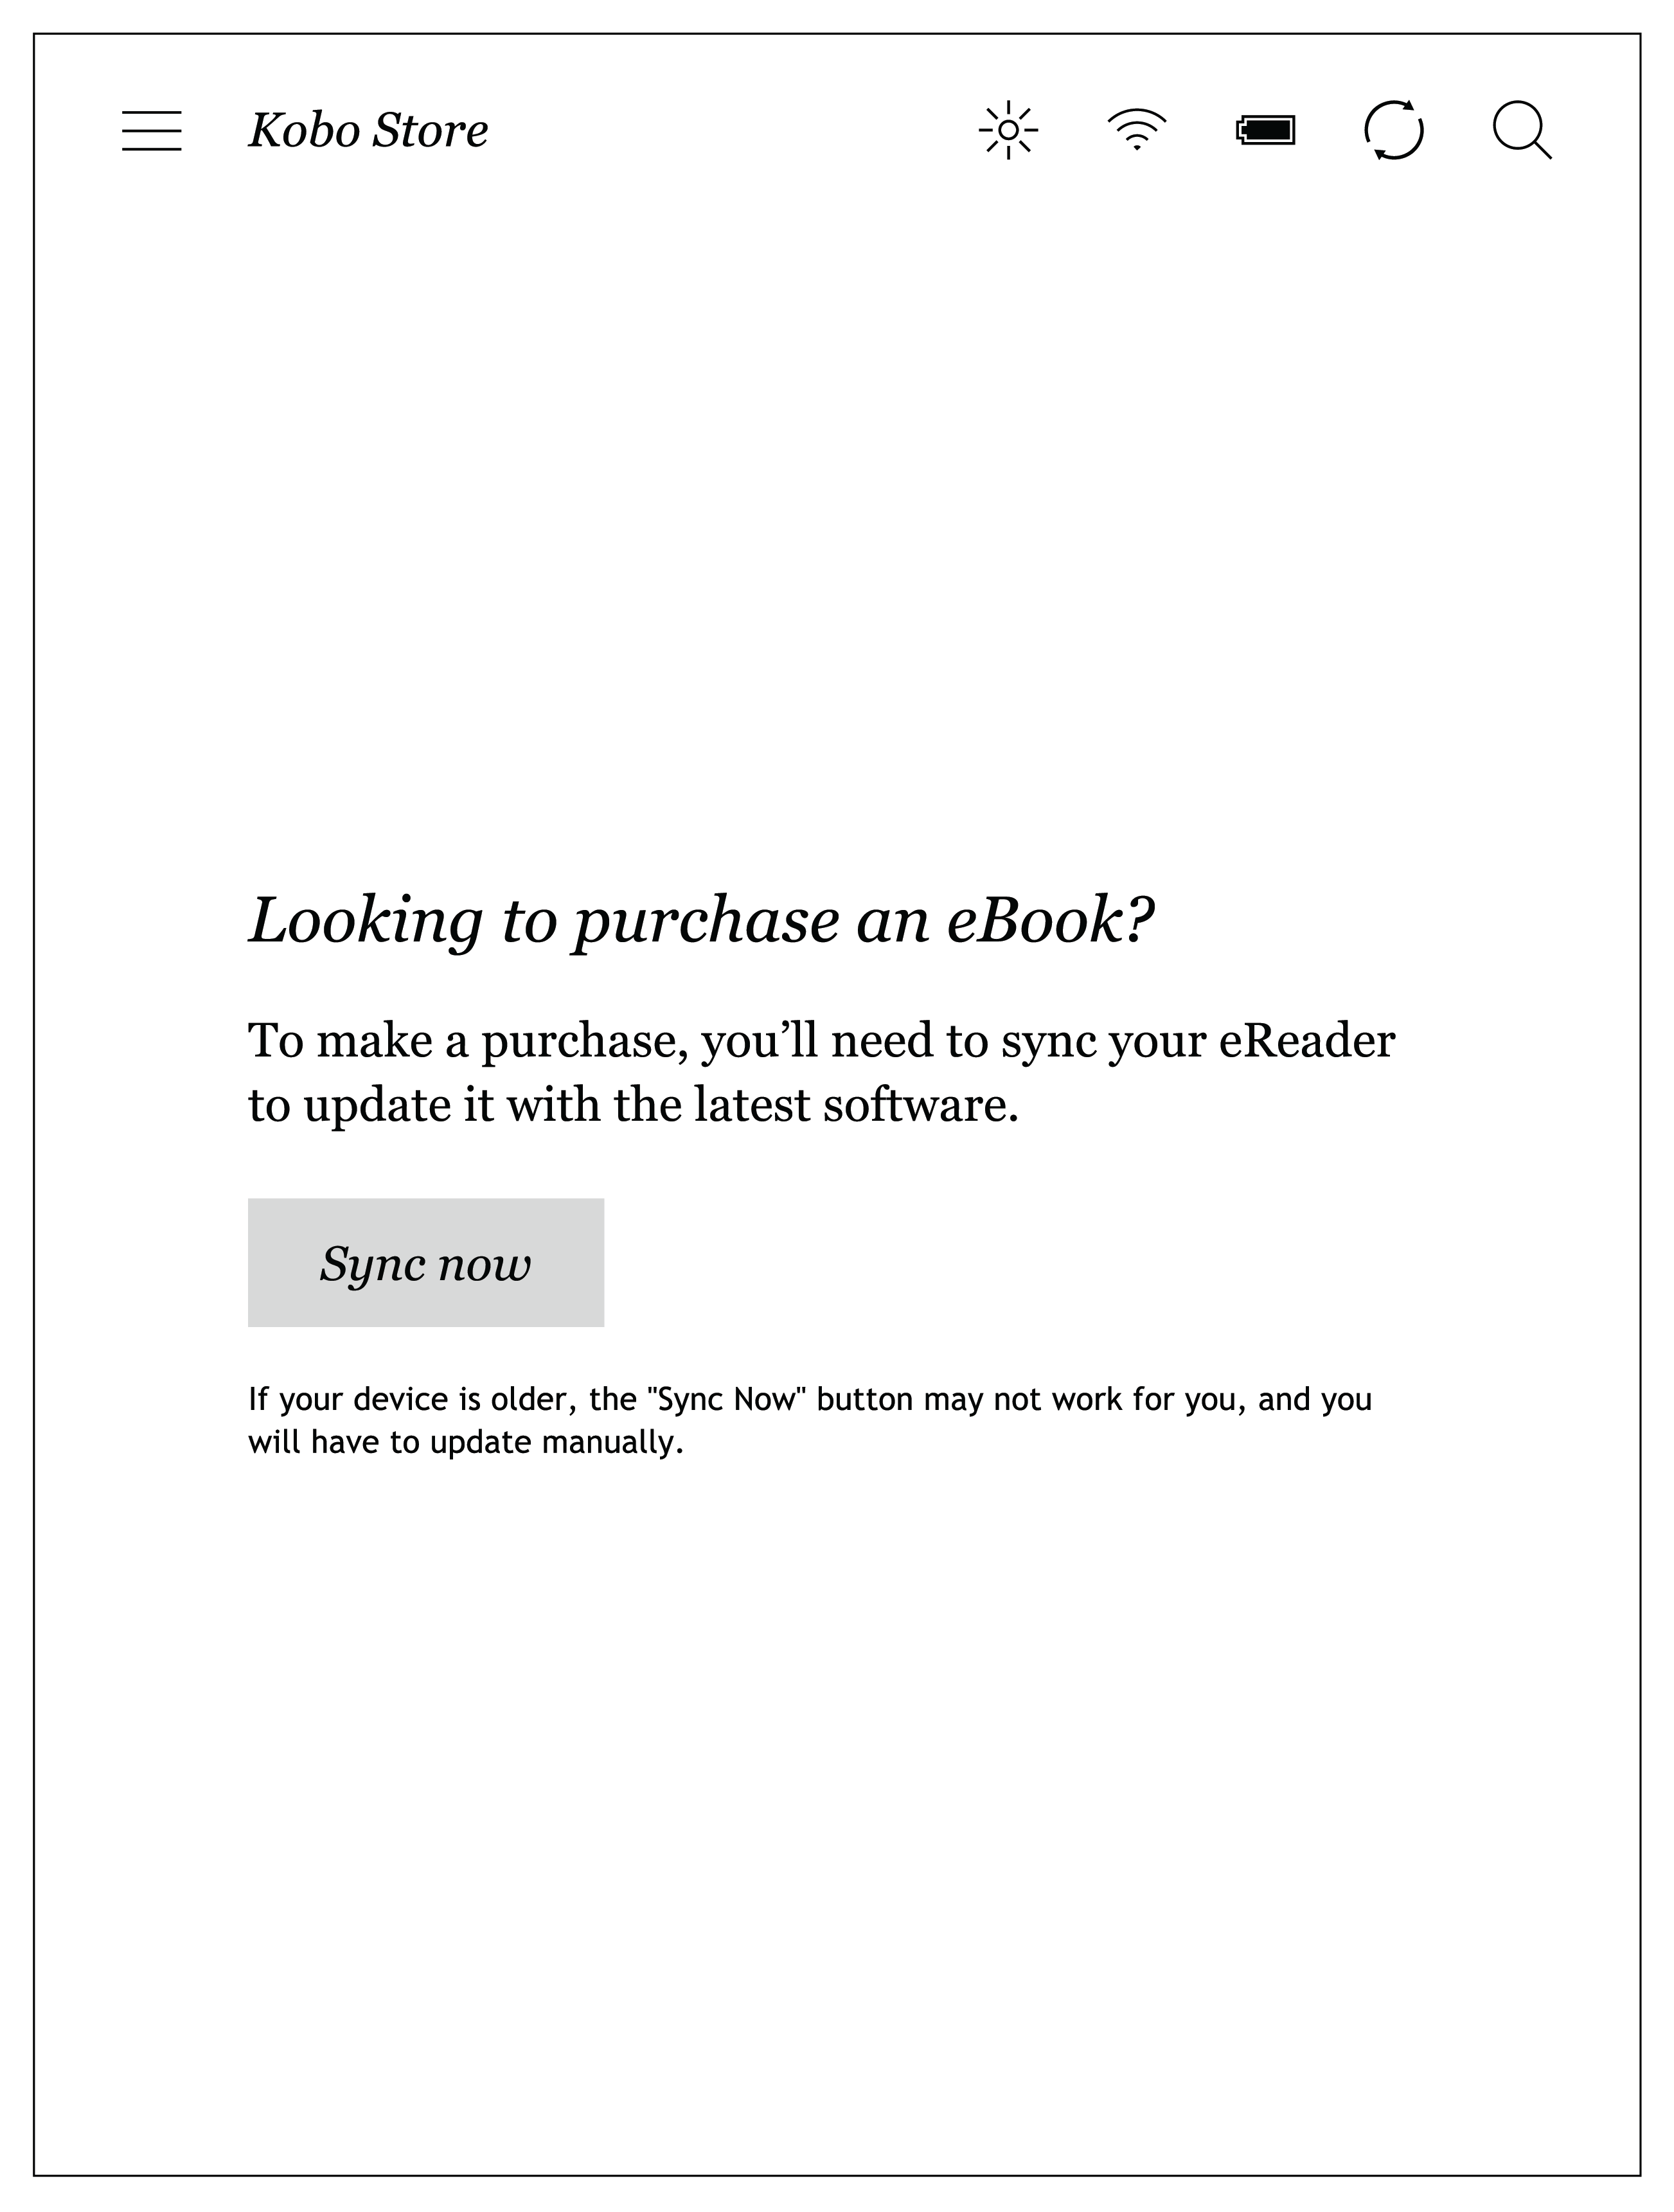 Looking_to_purchase_an_ebook_-01.png